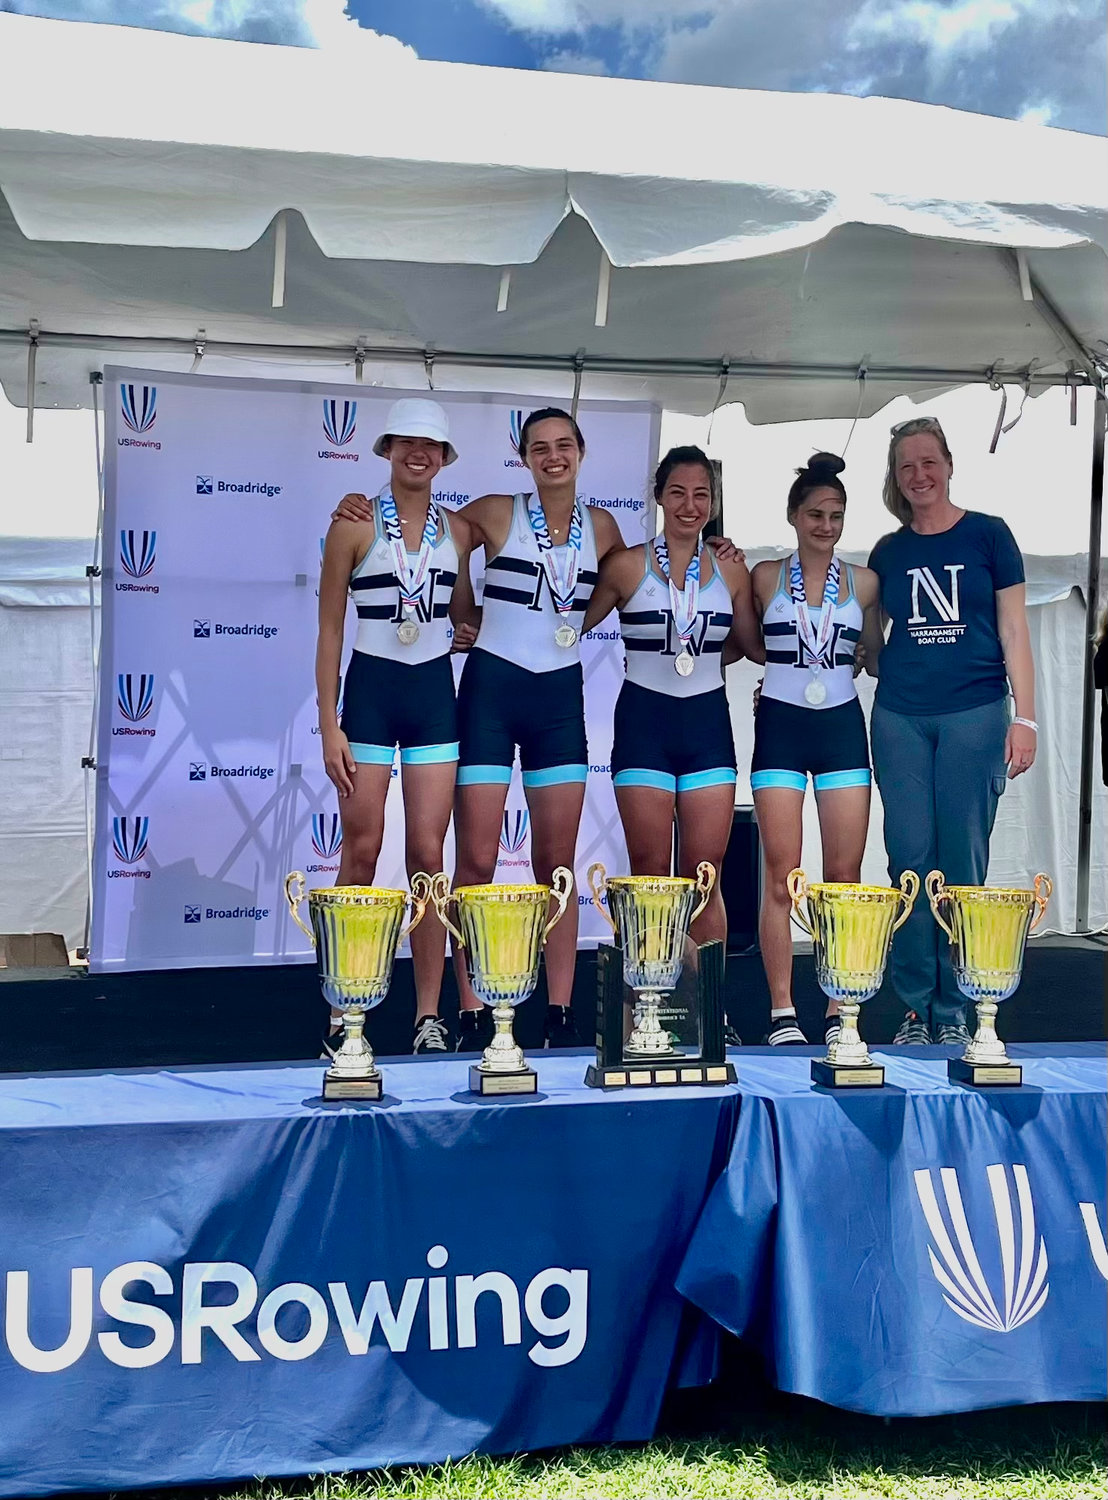 Sophia Haisman, Maude Smith-Montross, Gianna Vigliotti, and Estelle Pivorunas (from left to right) pose for a photo with their coach Daniela Roop, after receiving their medals.